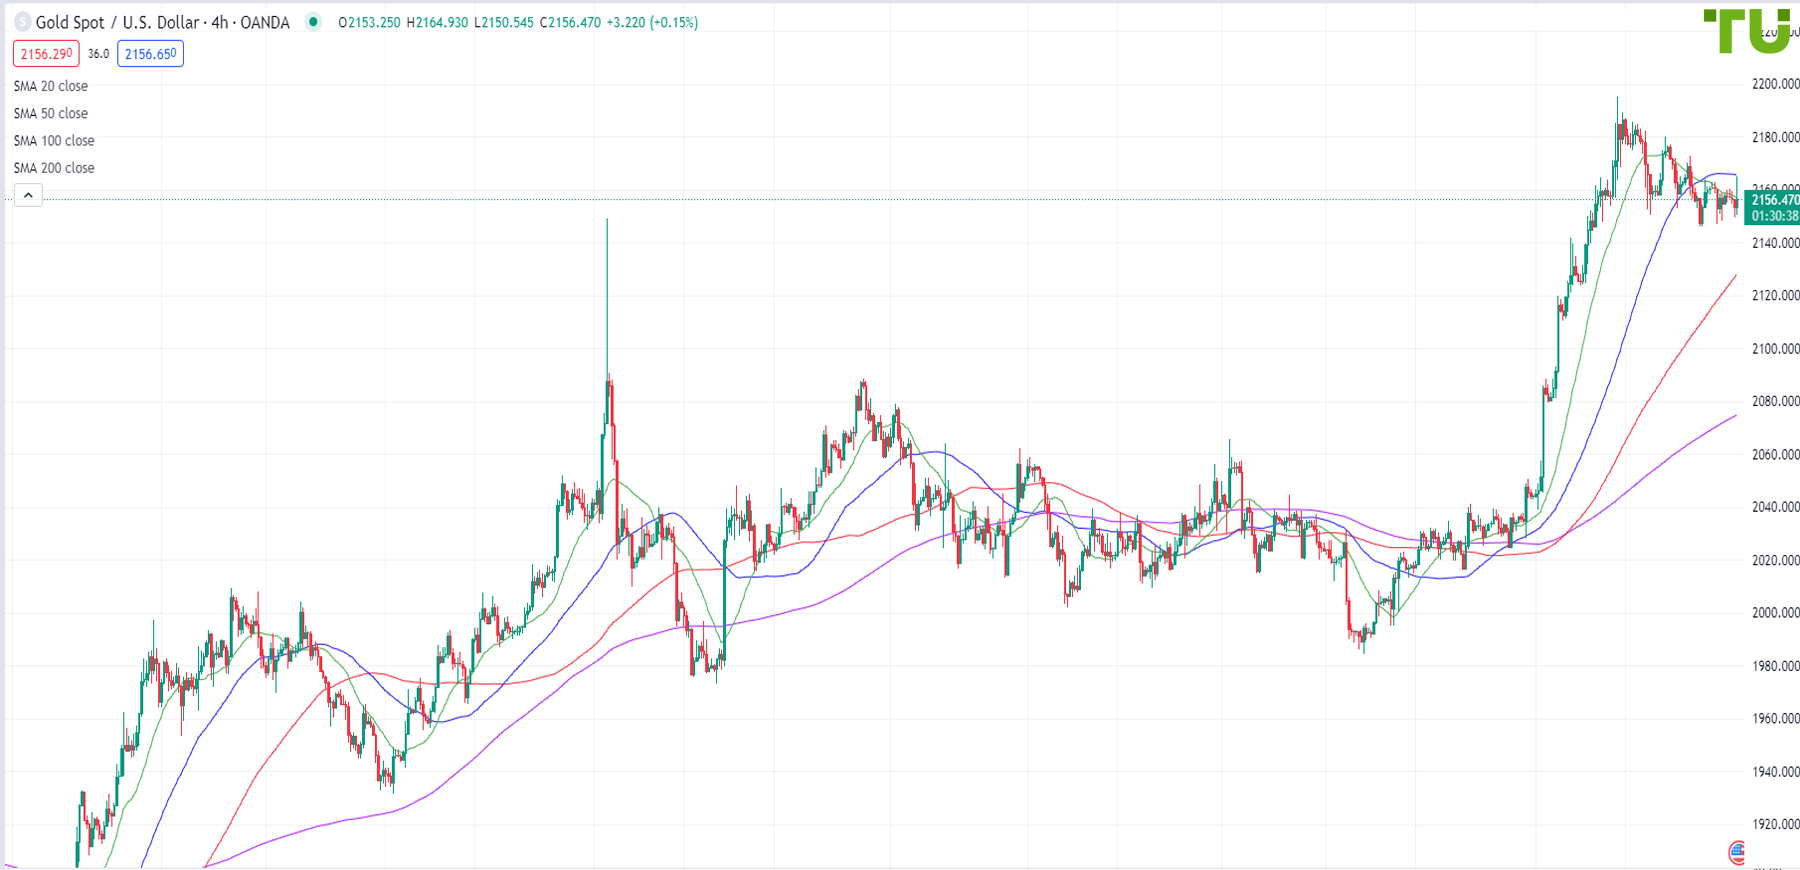 XAU/USD in anticipation of the Fed decision